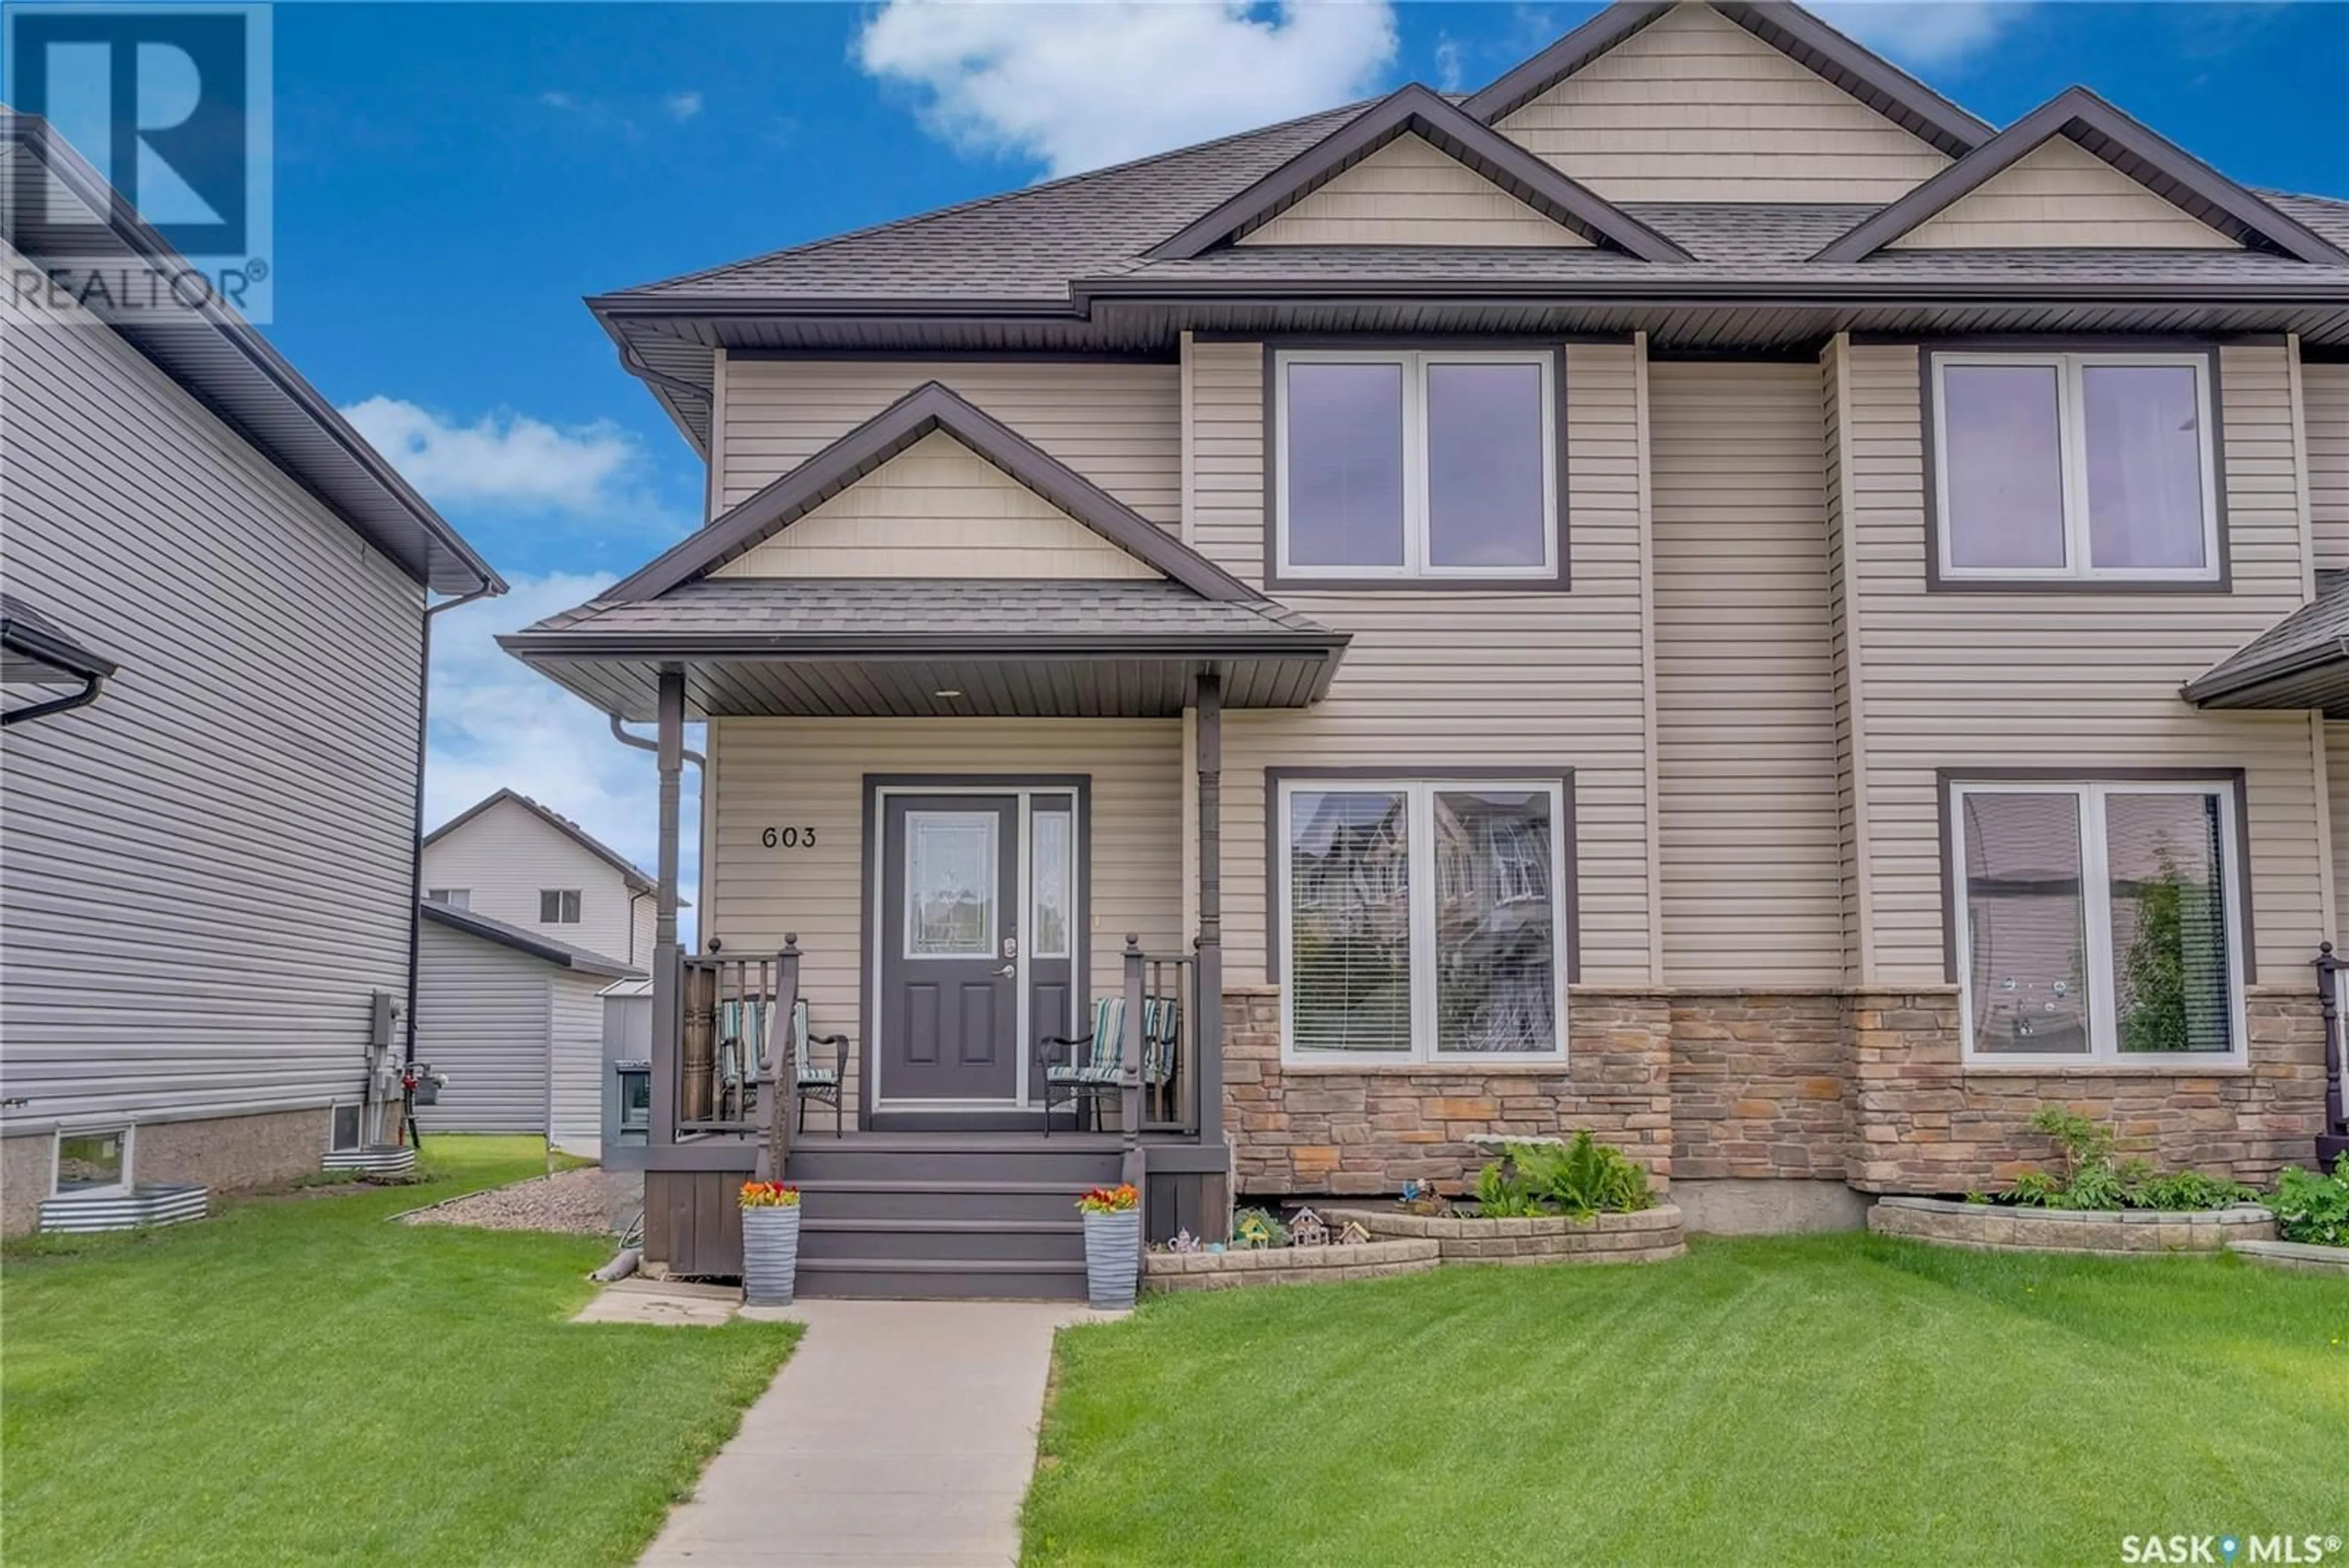 A pic from exterior of the house or condo for 603 Coad CRESCENT, Saskatoon Saskatchewan S7R0A8